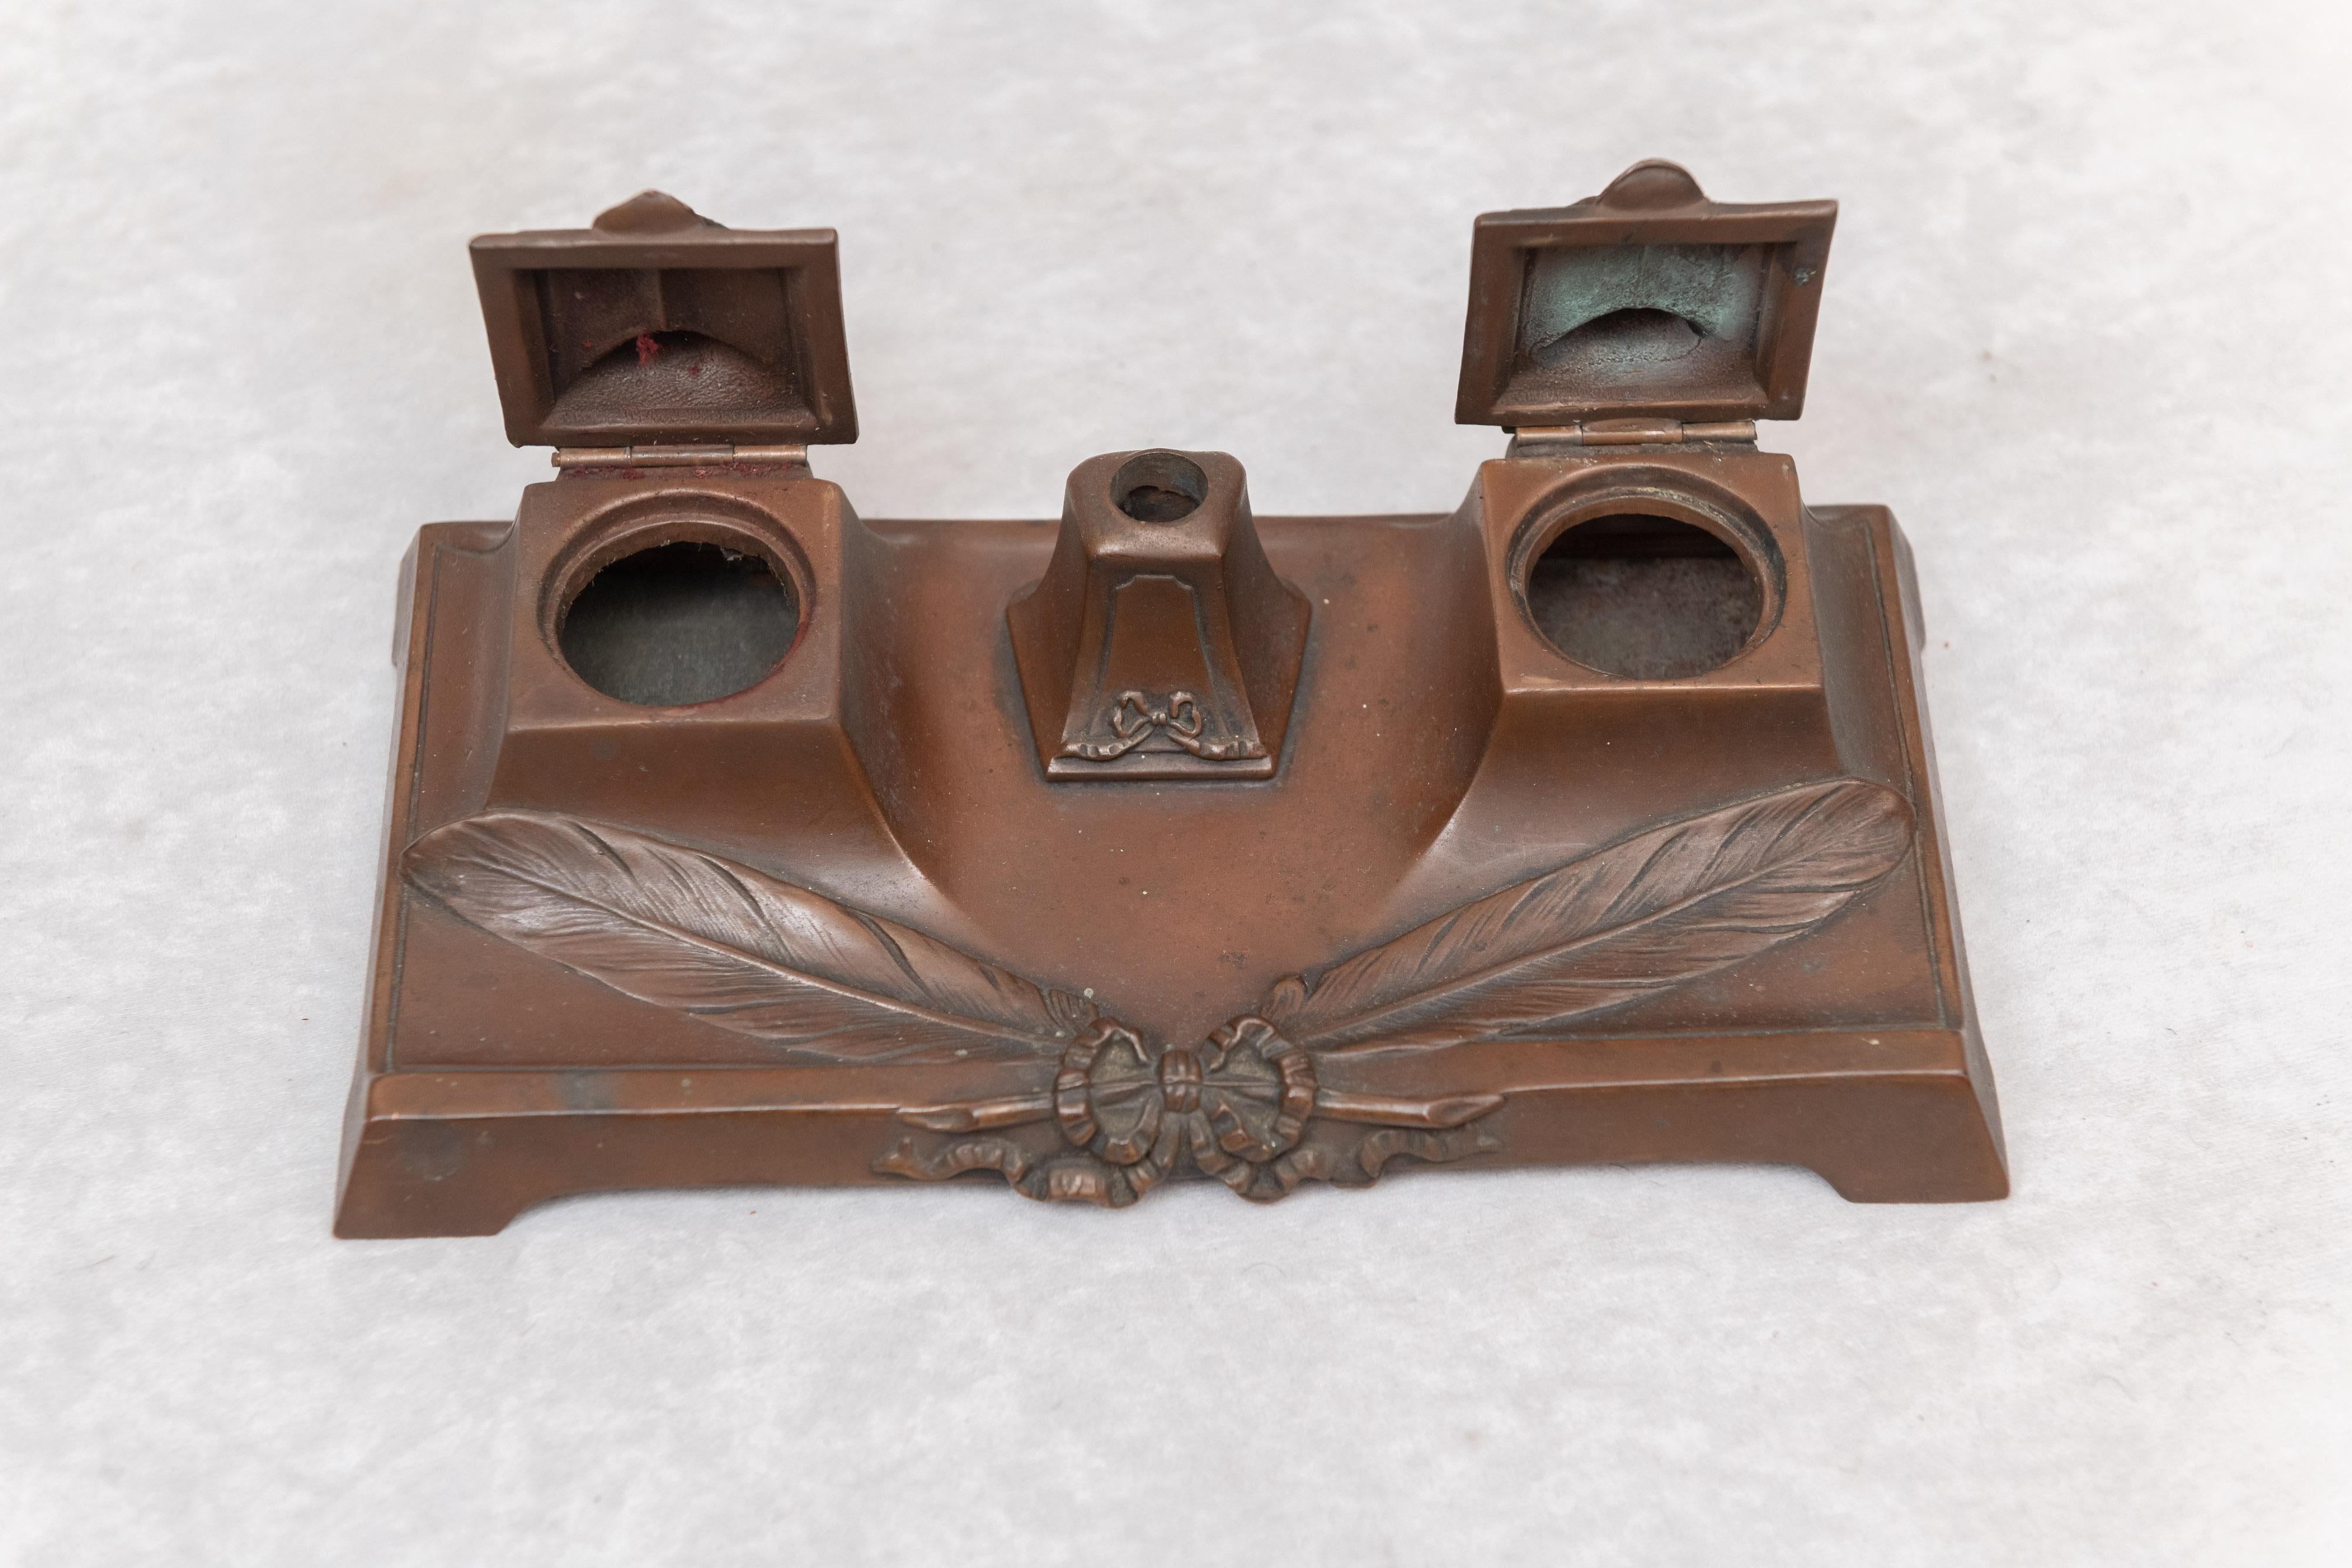 American Craftsman Antique Double Inkwell with Owls, circa 1920